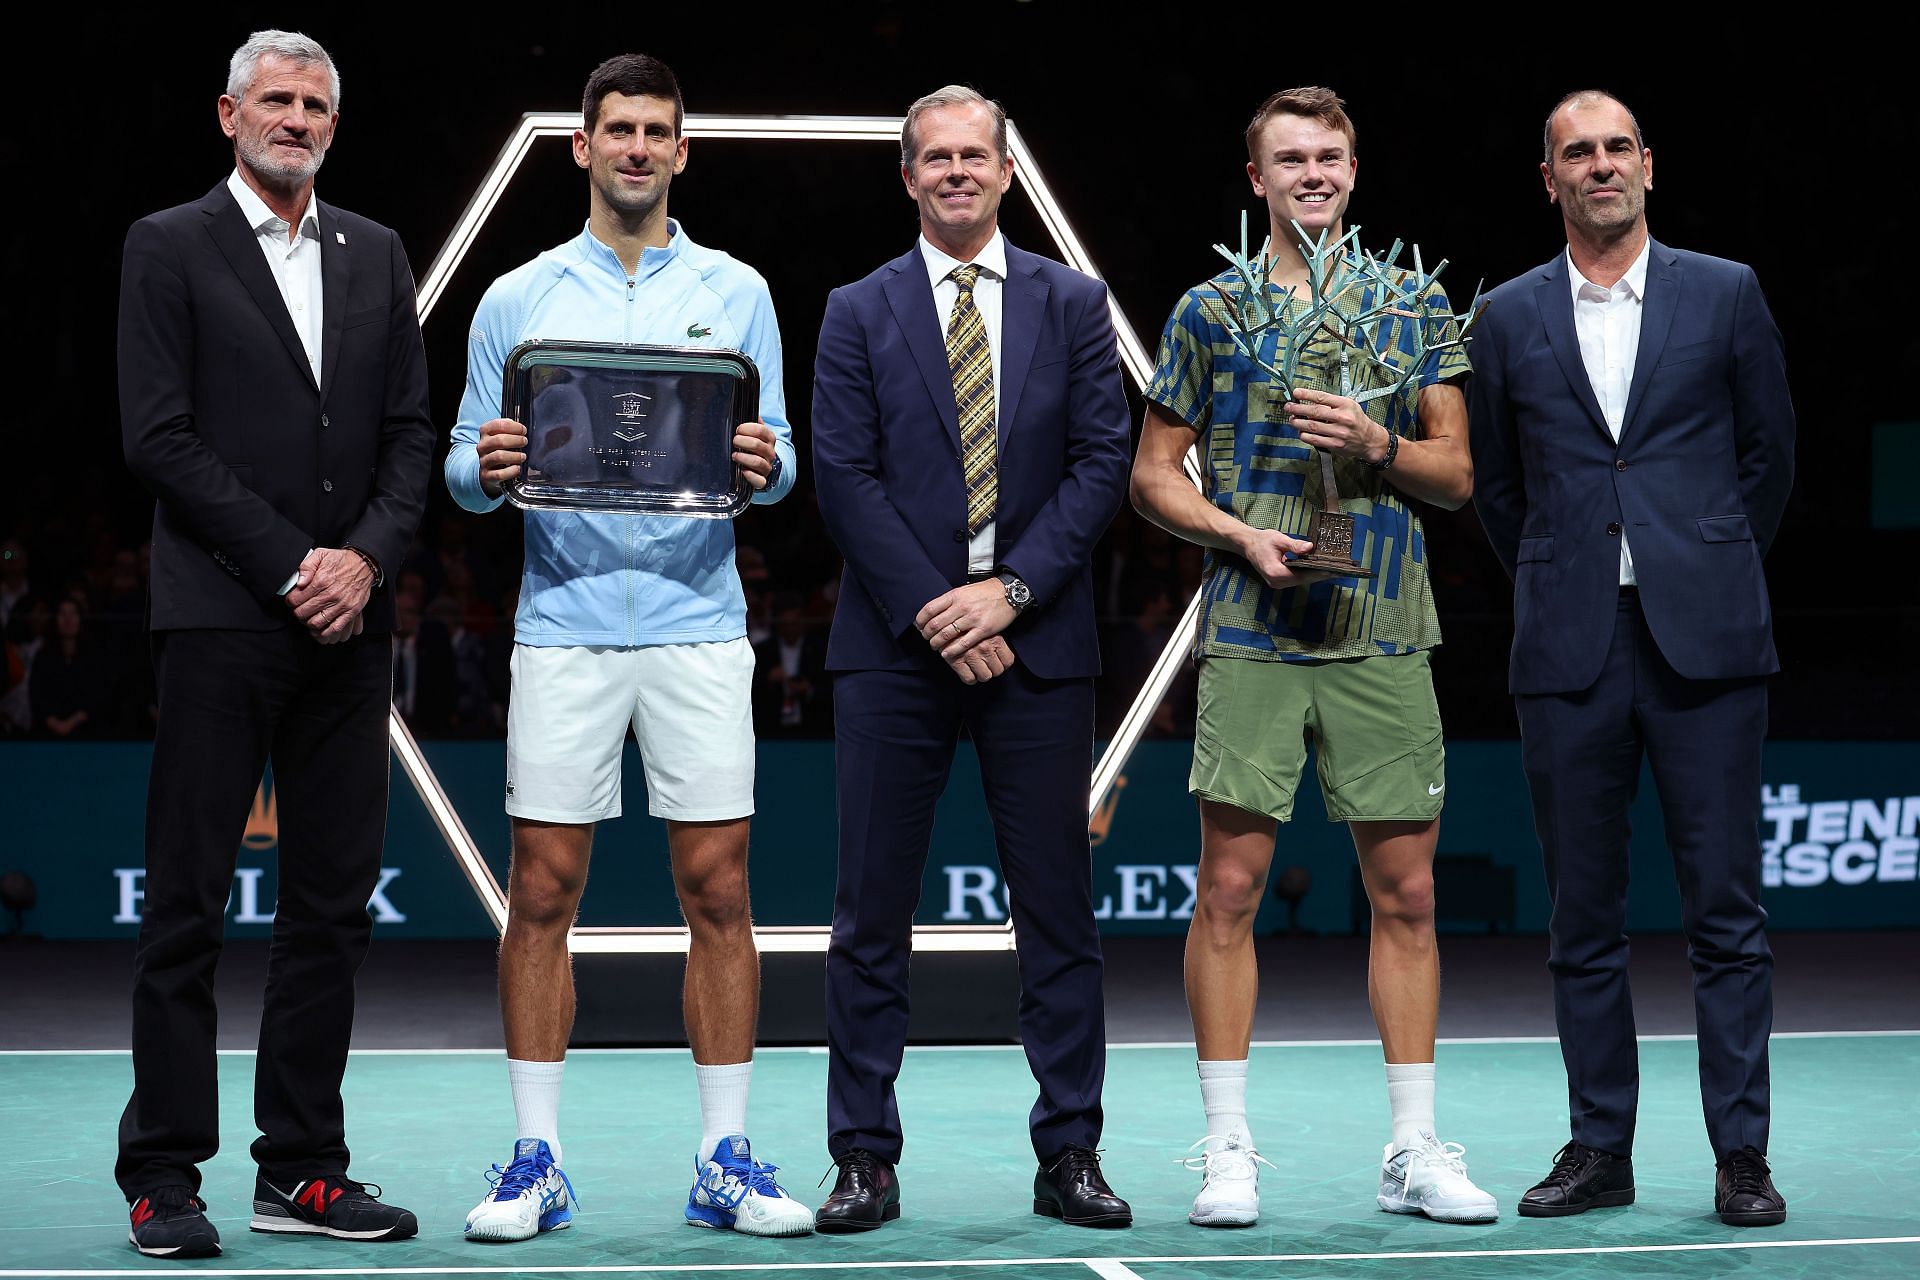 Holger Rune (2nd from R) with the trophy after winning the Paris Masters